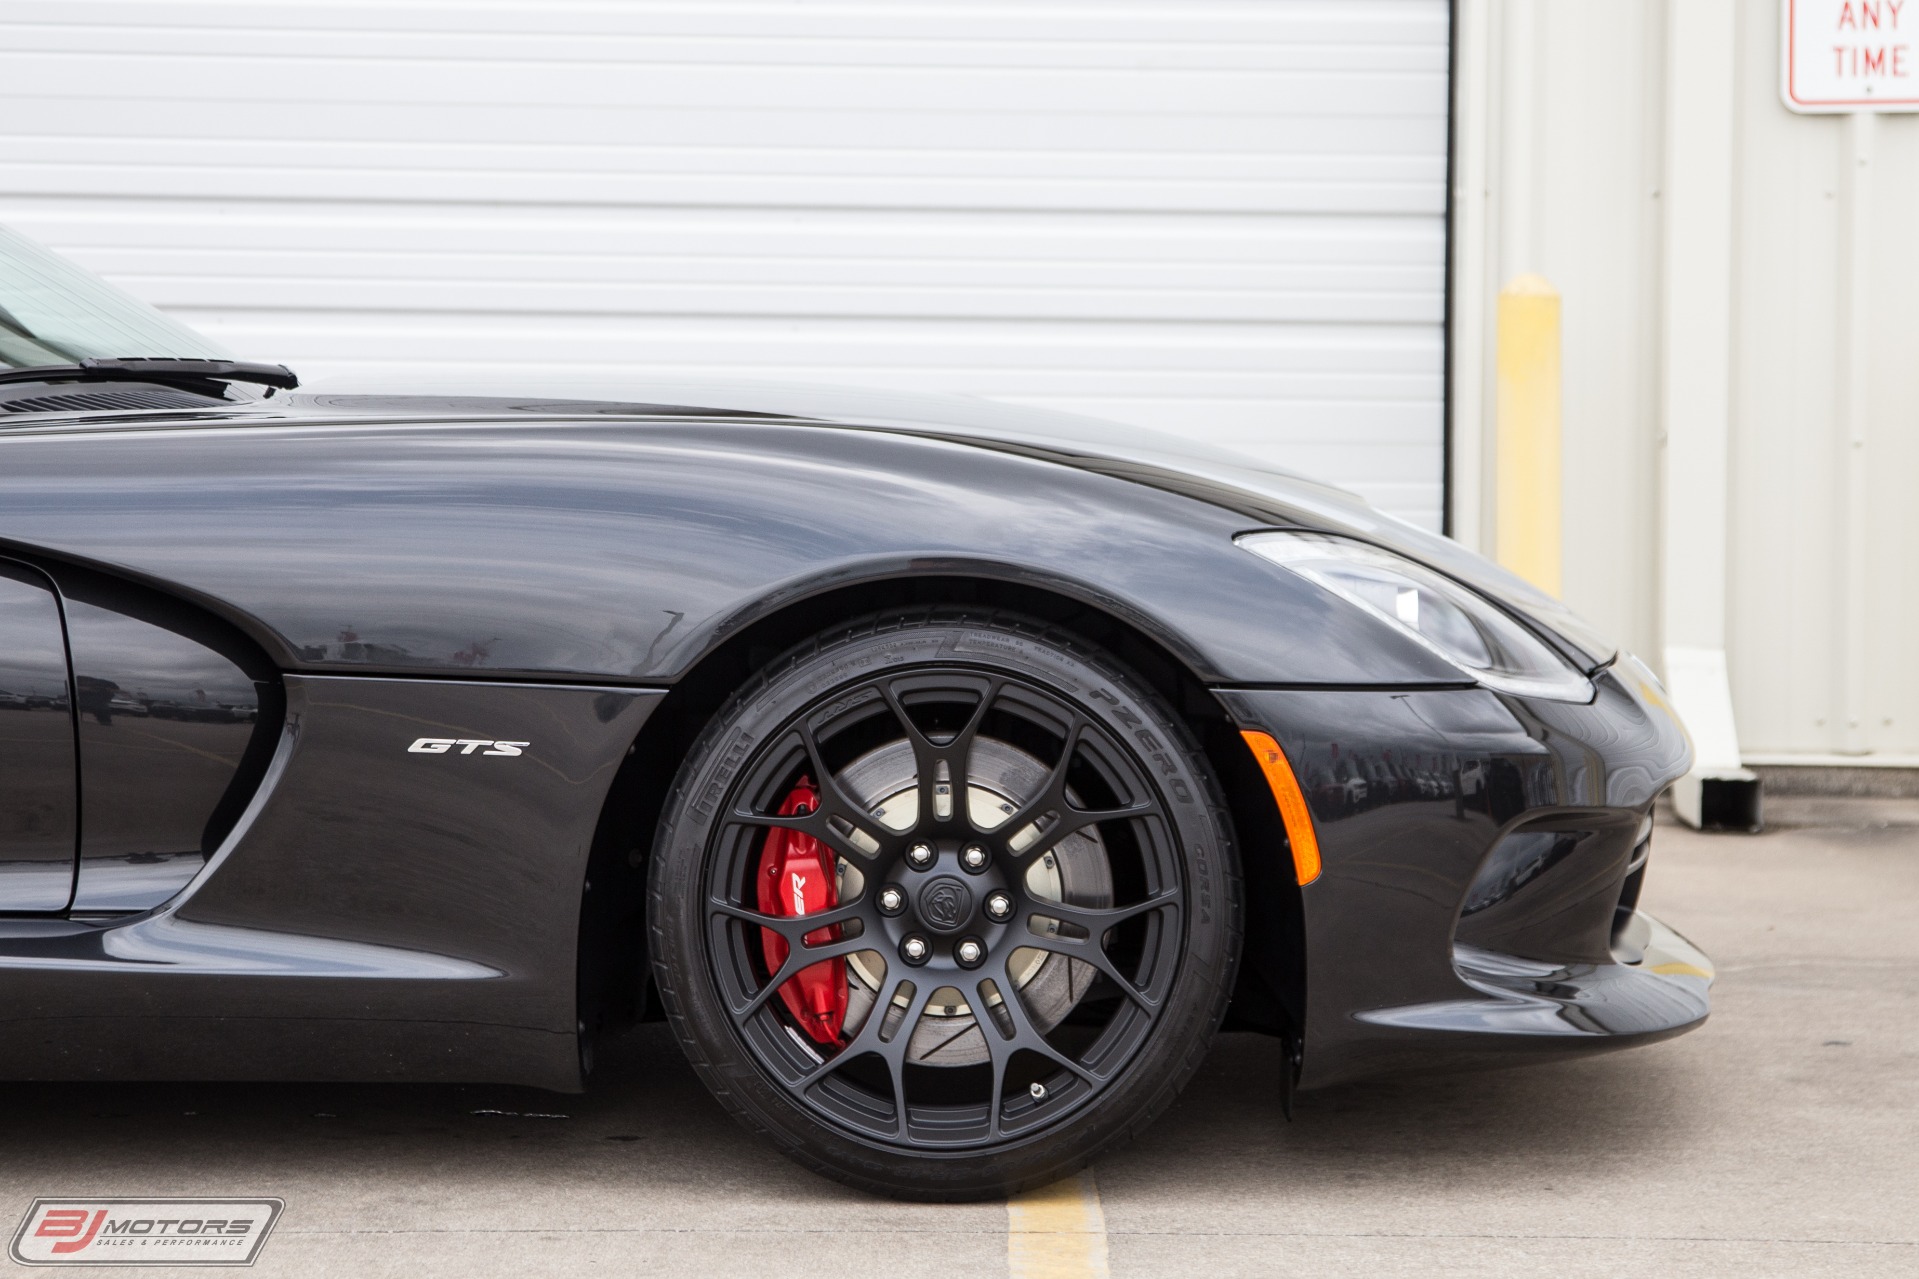 Used-2014-Dodge-Viper-GTS-VE-Tractive-Electronic-Suspension